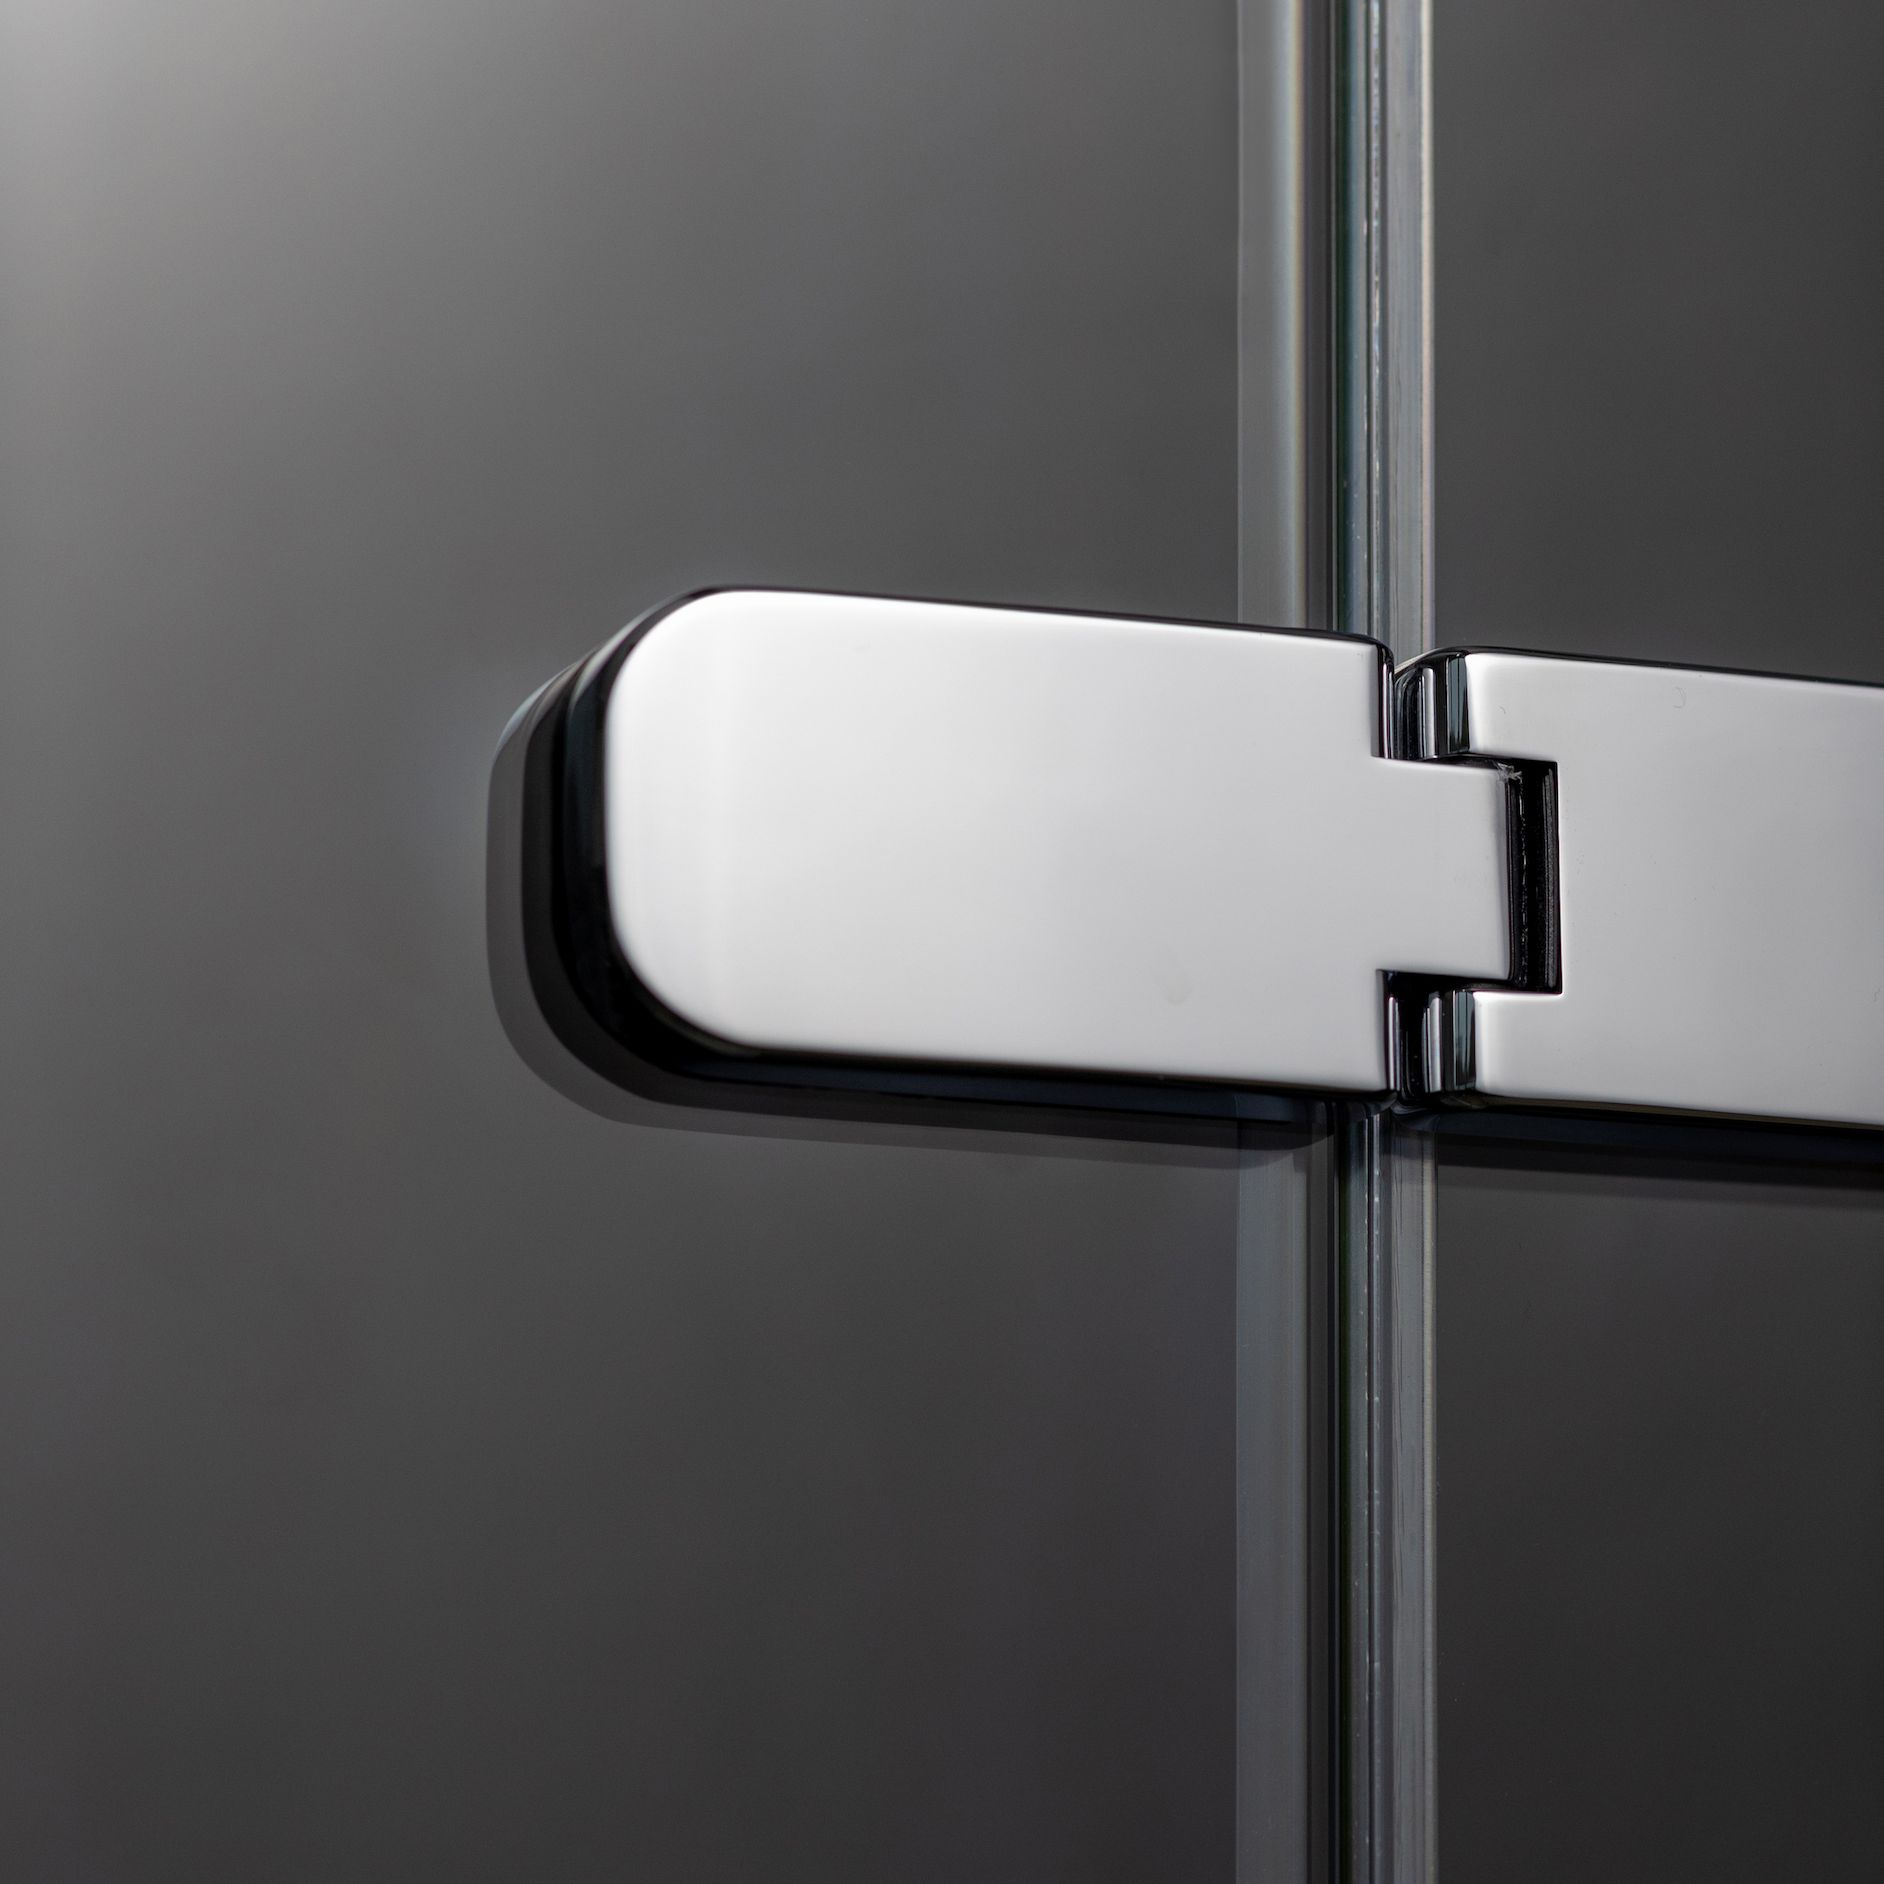 Curved hinge detailing - another modern design treatment to add to the overall clean lines of your ORO shower.